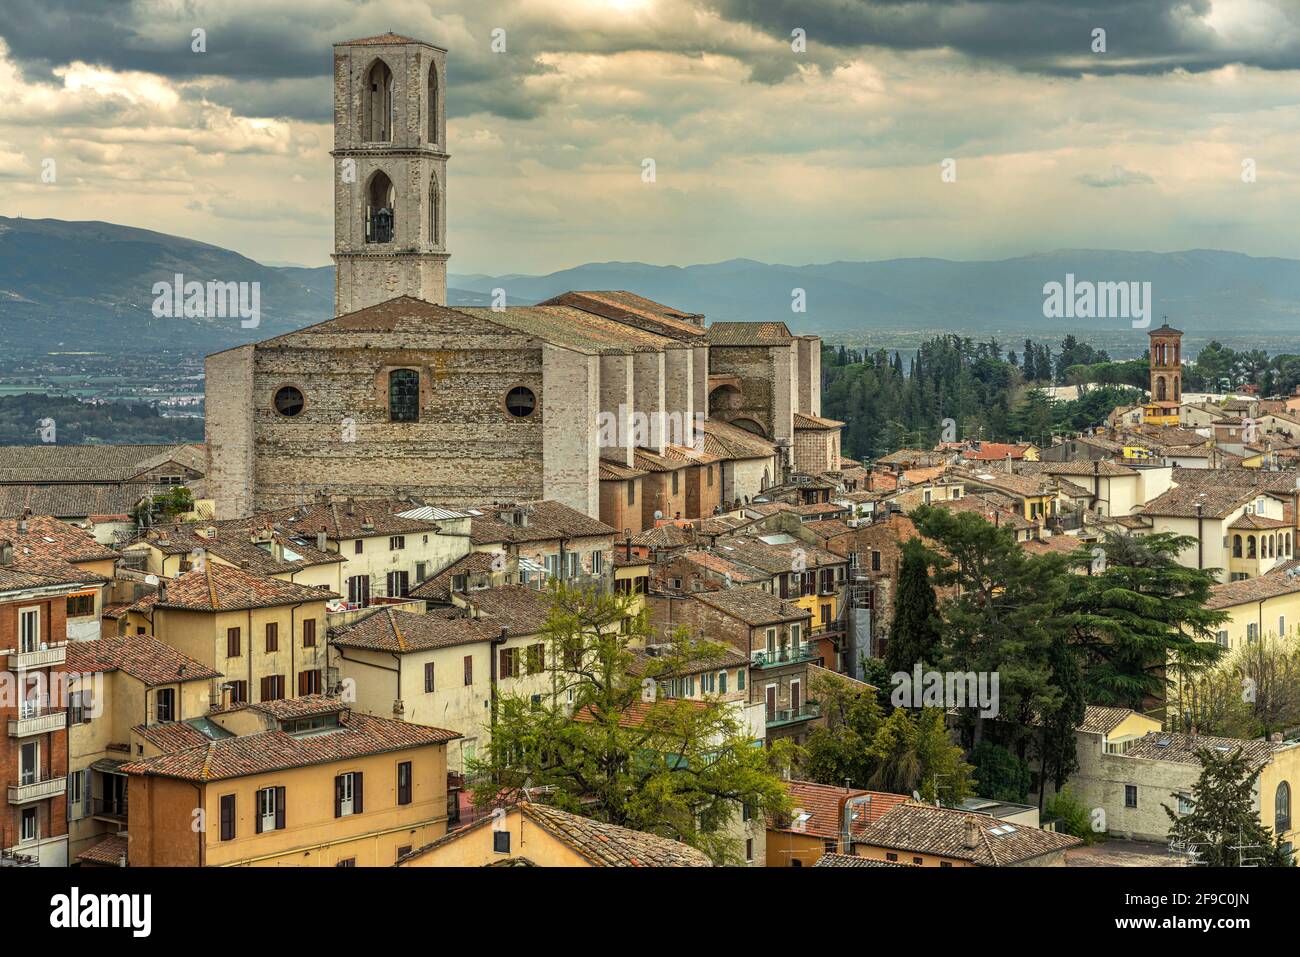 Urban landscape of the city of Perugia. Imposing The convent of San Domenico with its Romanesque bell tower. Perugia, Umbria, Italy, Europe Stock Photo